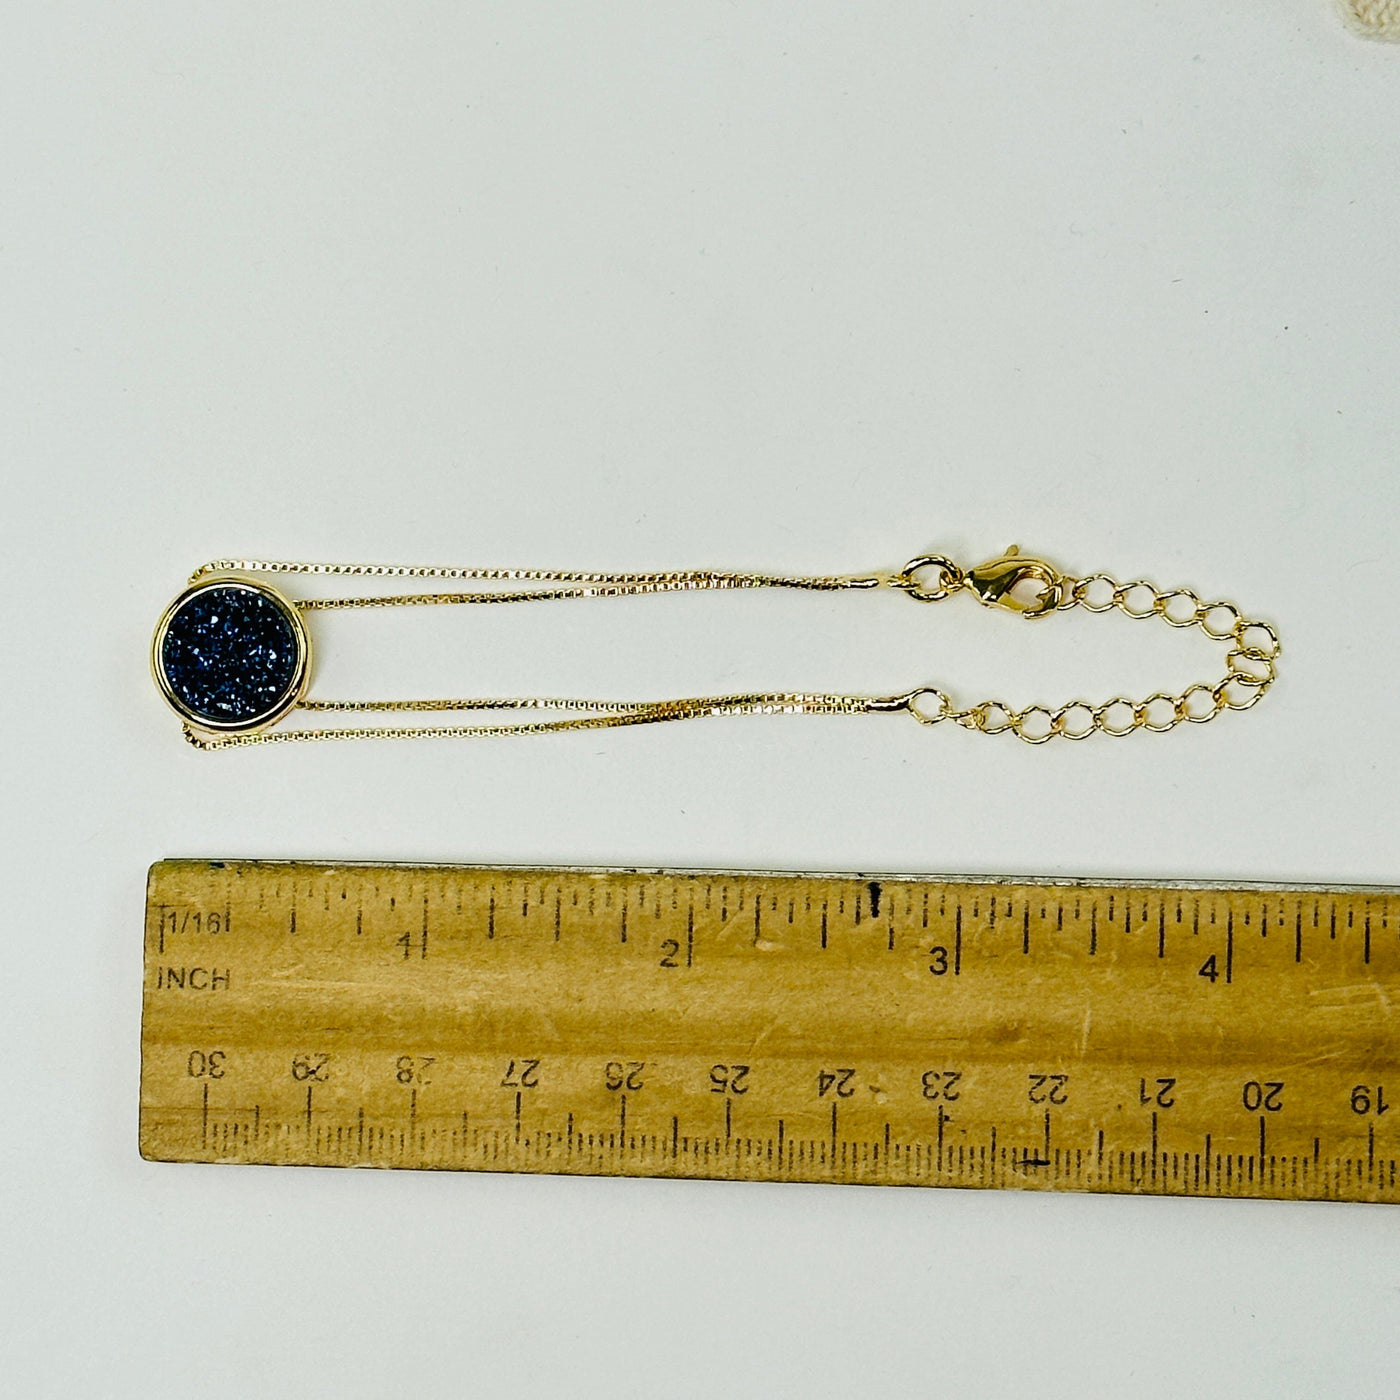 mystic blue druzy gold double chain bracelet next to a ruler for size reference